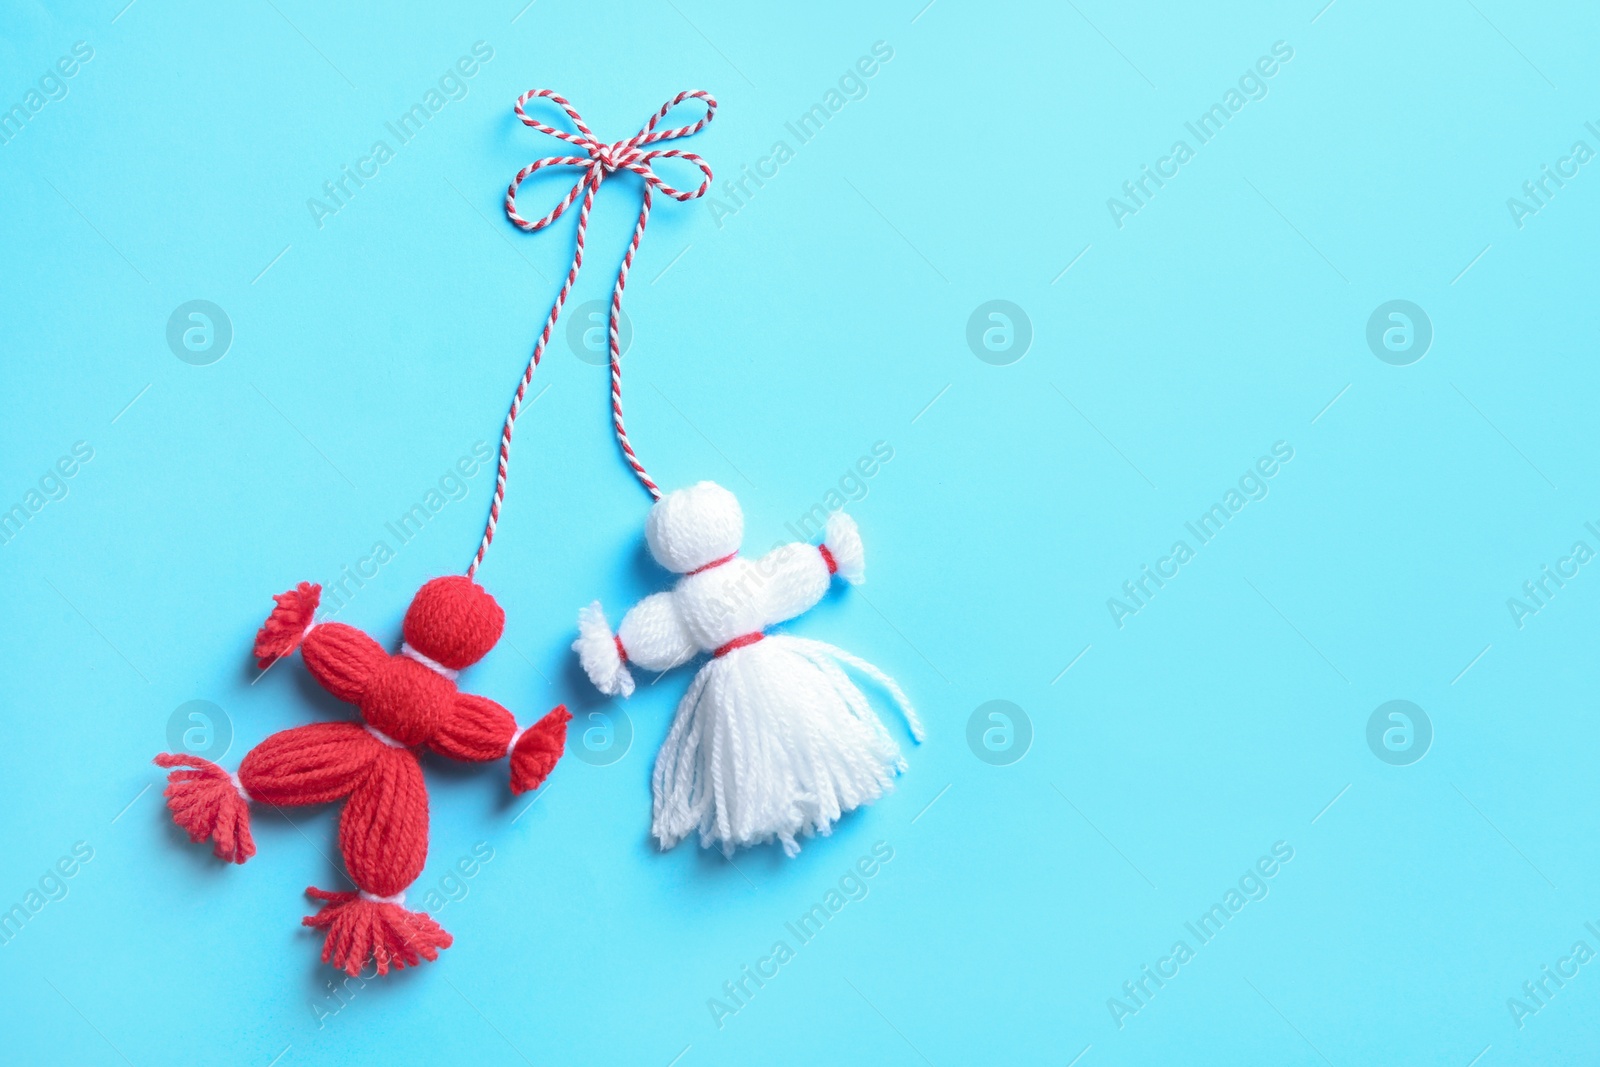 Photo of Traditional martisor shaped as man and woman on light blue background, top view with space for text. Beginning of spring celebration